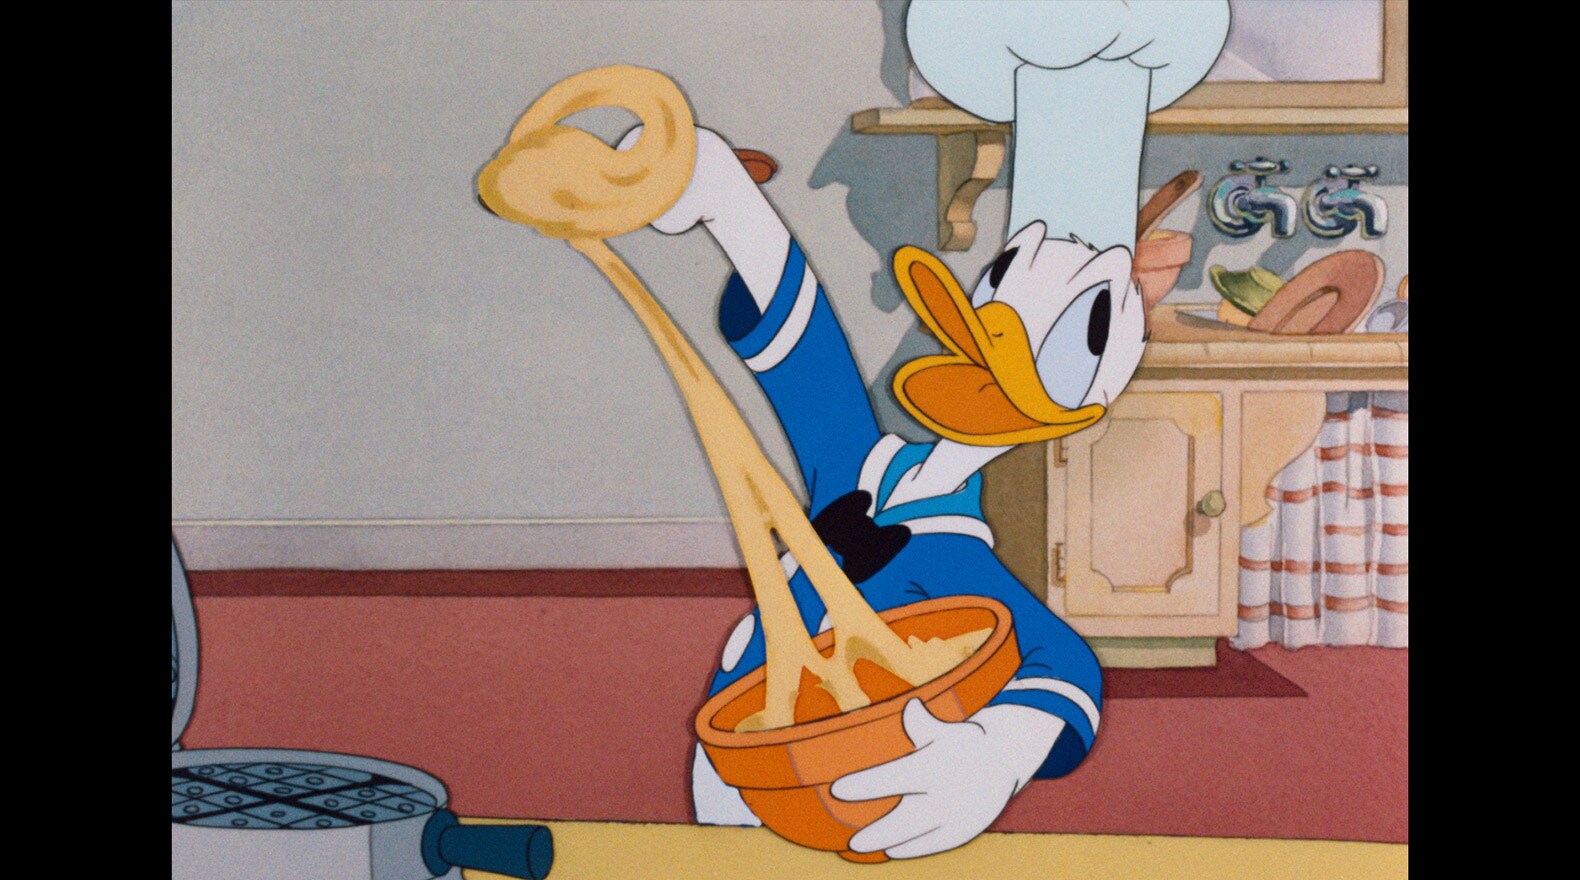 Donald tries his hand at cooking while listening to a radio show.